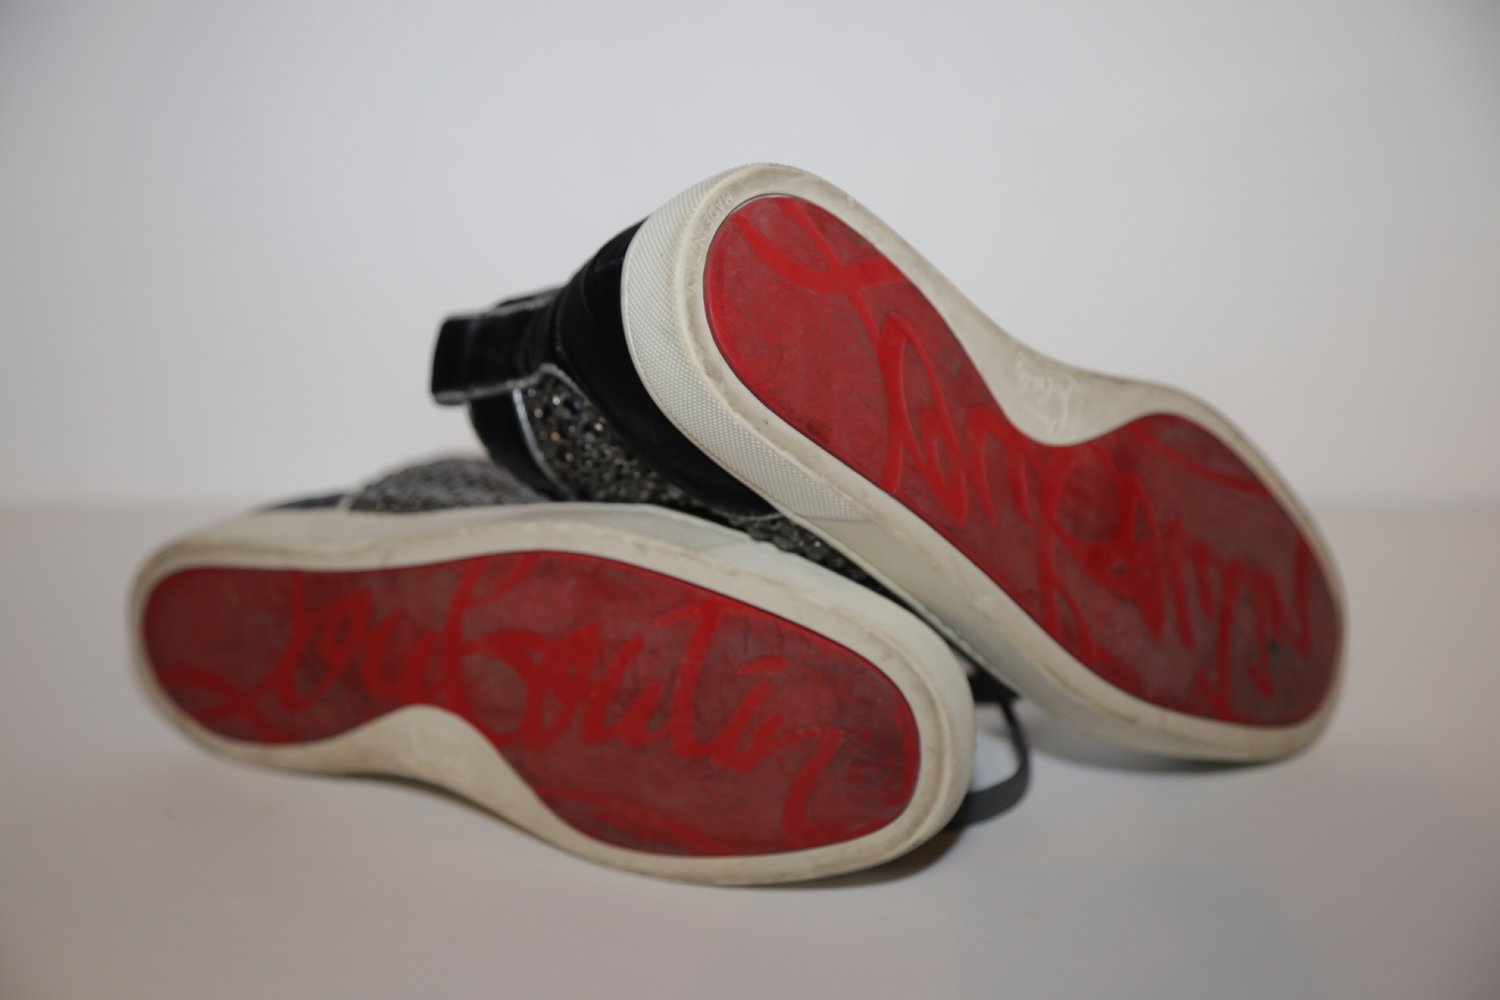 Image of CHRISTIAN LOUBOUTIN SNEAKERS